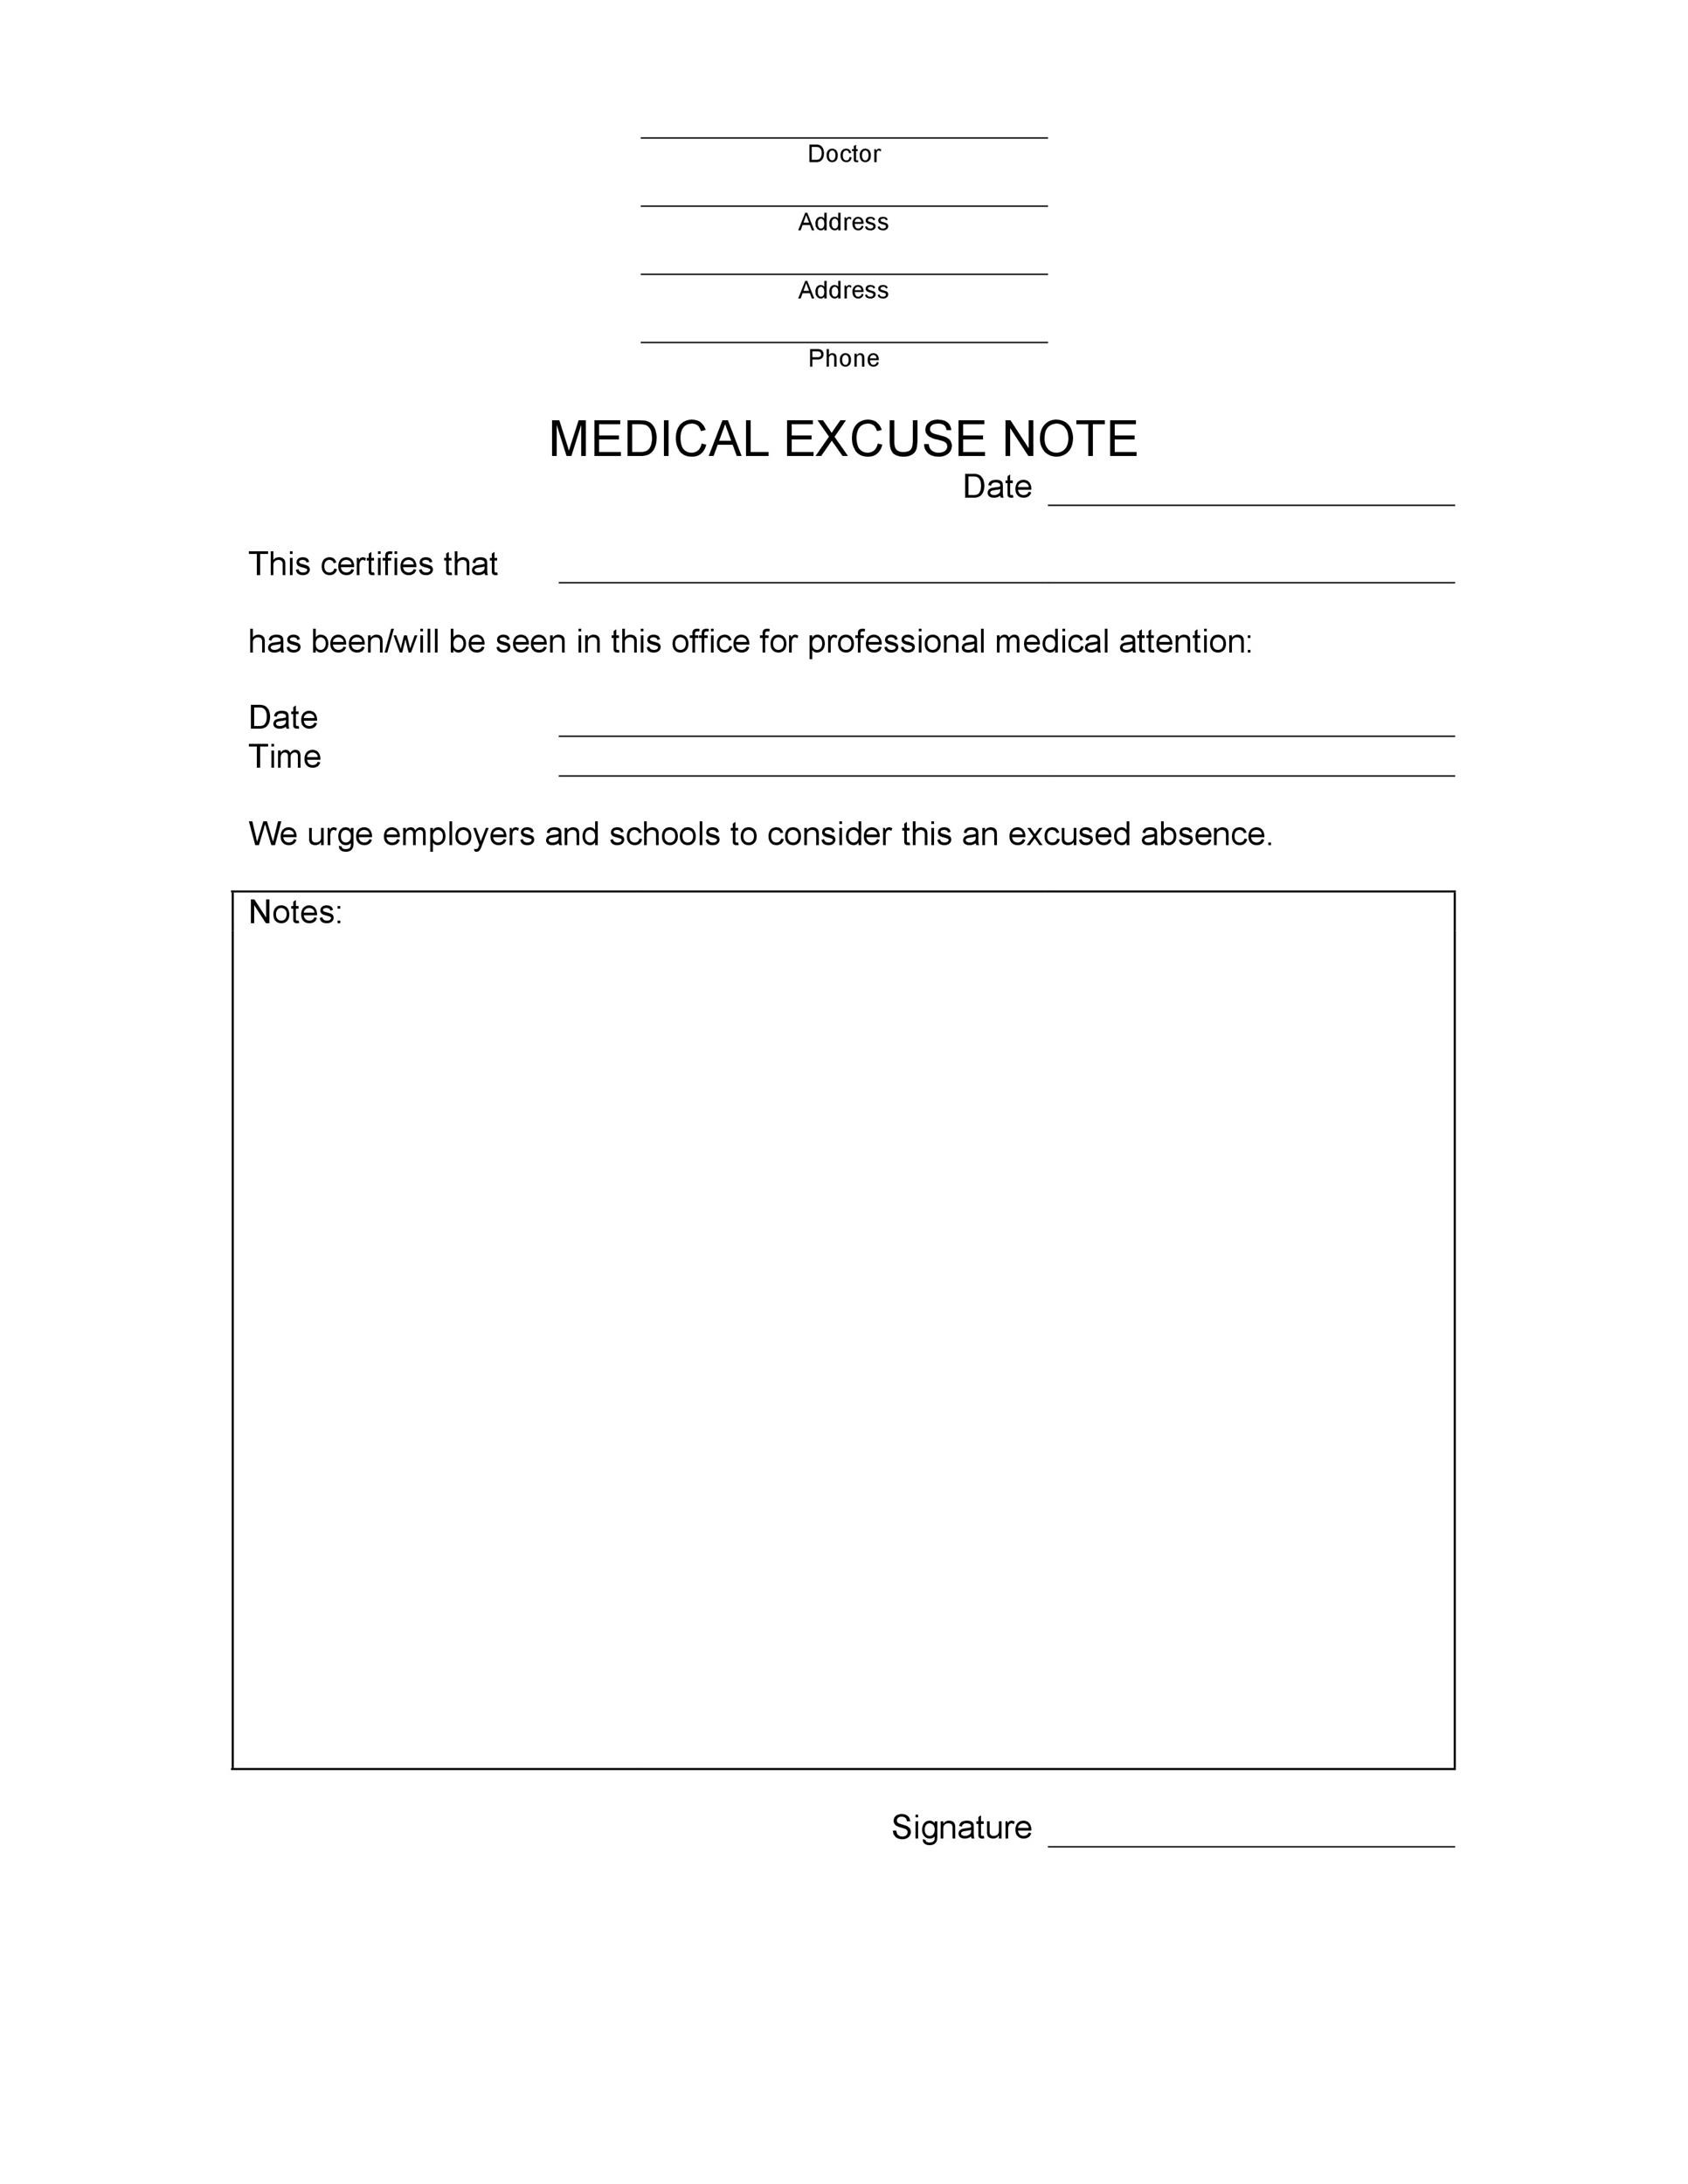 excuse-free-printable-doctors-note-for-work-free-printable-templates